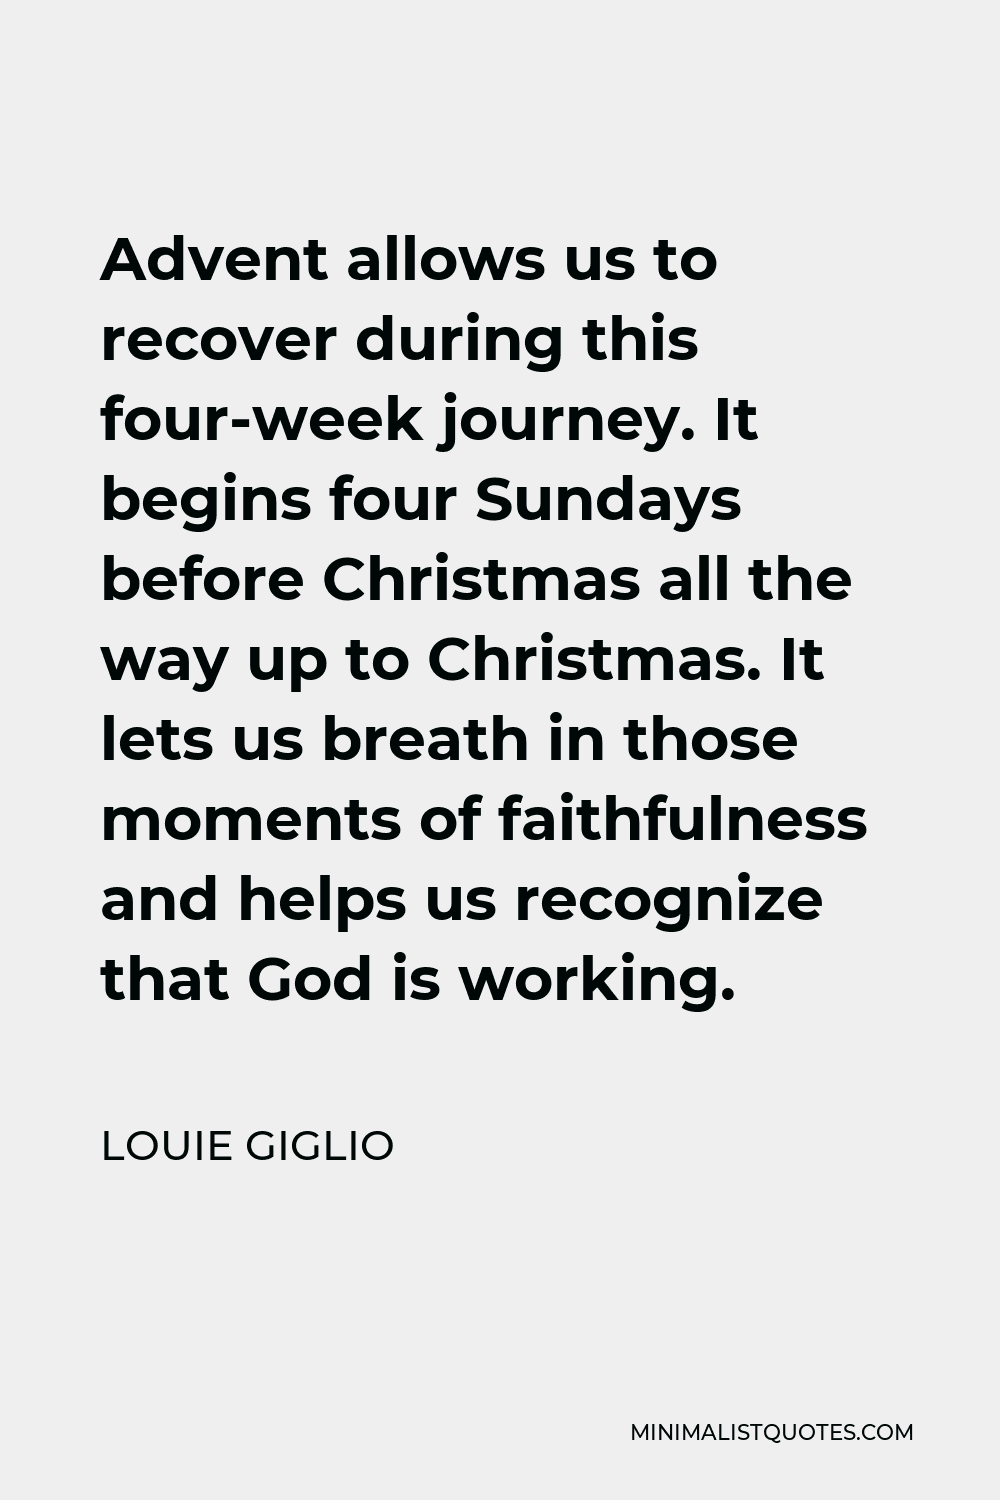 Louie Giglio Quote - Advent allows us to recover during this four-week journey. It begins four Sundays before Christmas all the way up to Christmas. It lets us breath in those moments of faithfulness and helps us recognize that God is working.